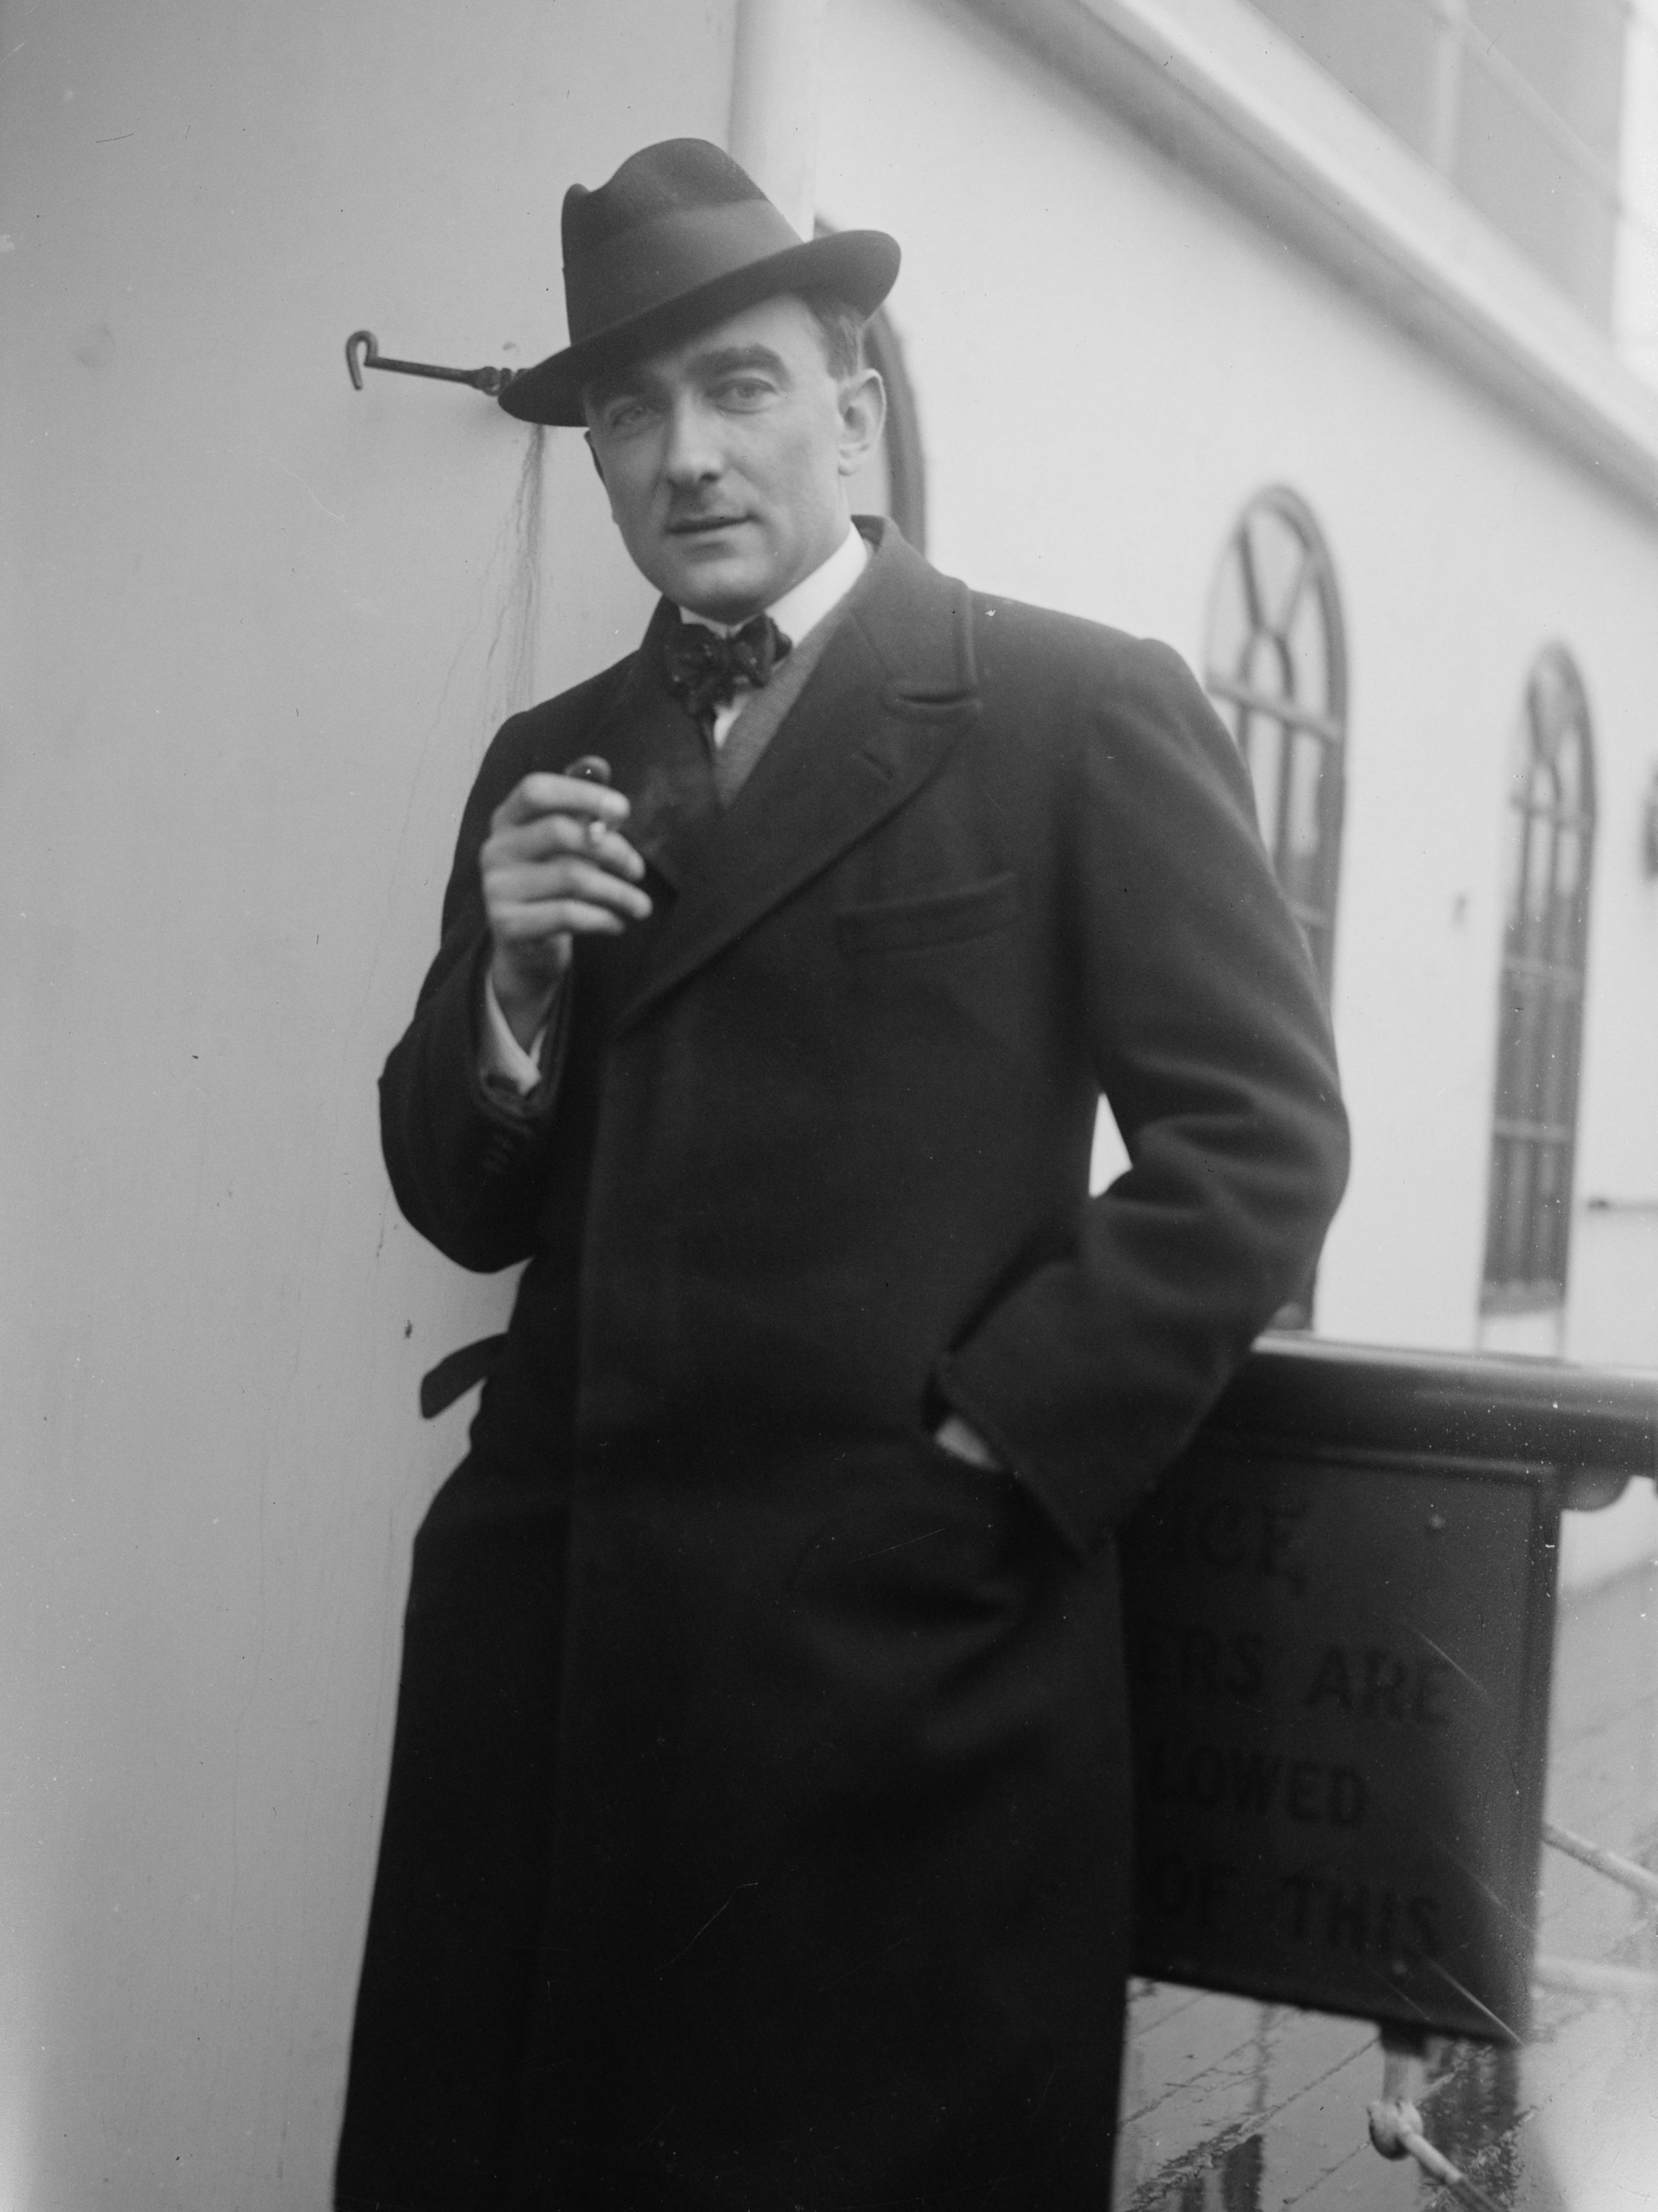 Portrait of Karol Szymanowski. He is wearing a coat and a hat, holding a cigarette in his right hand.